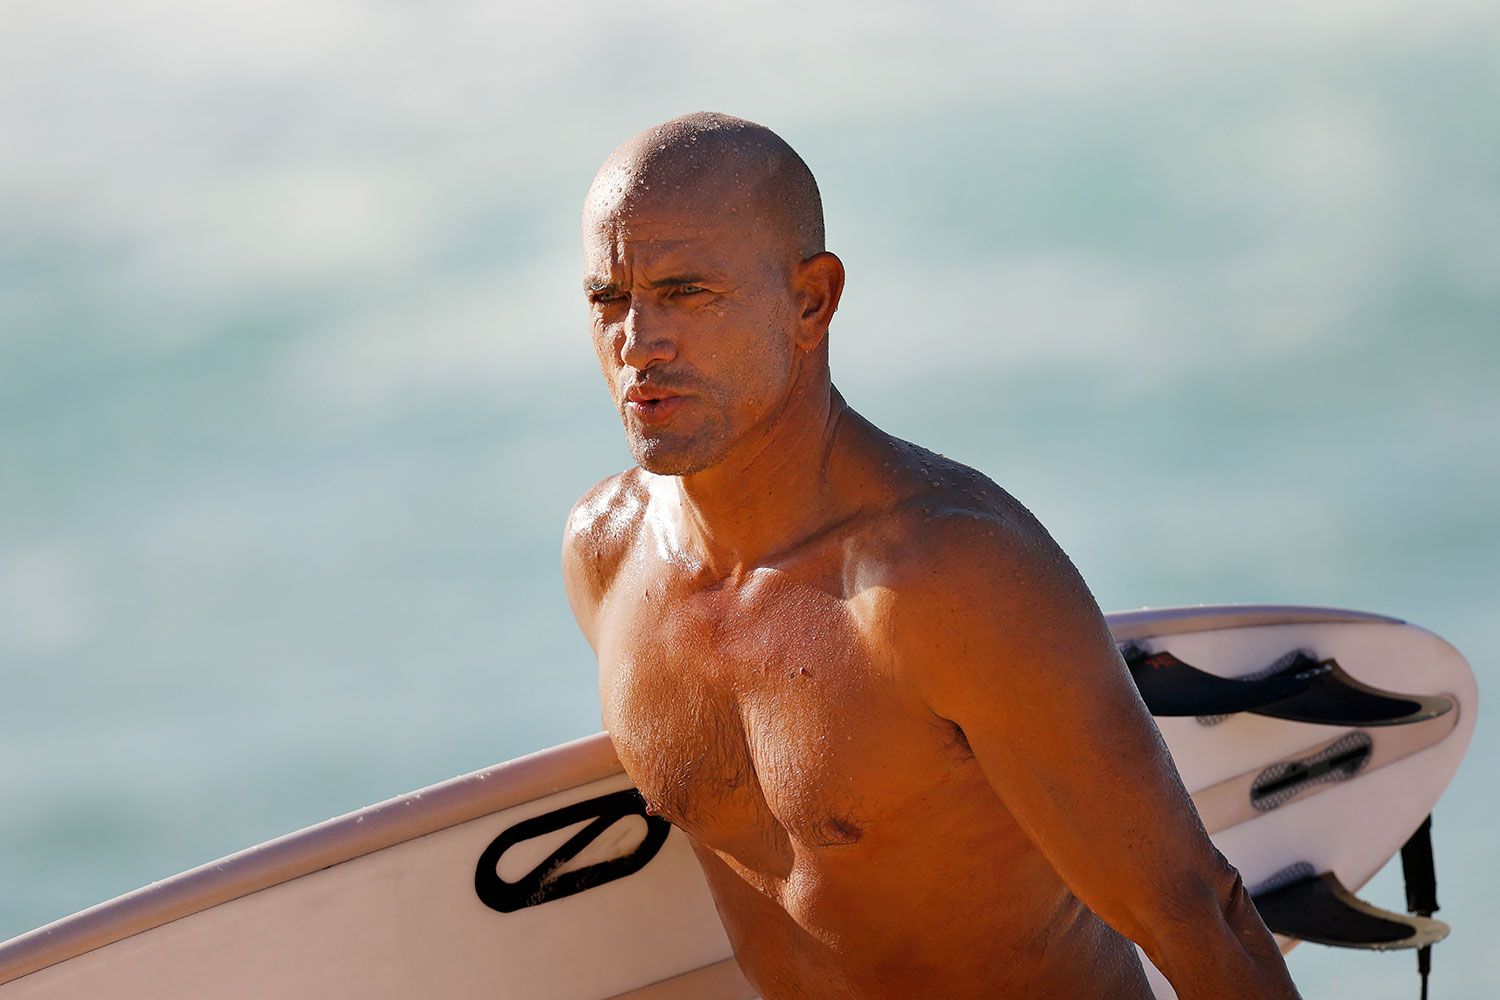 Kelly Slater Net Worth - The Surfer's Fortune And Business Ventures